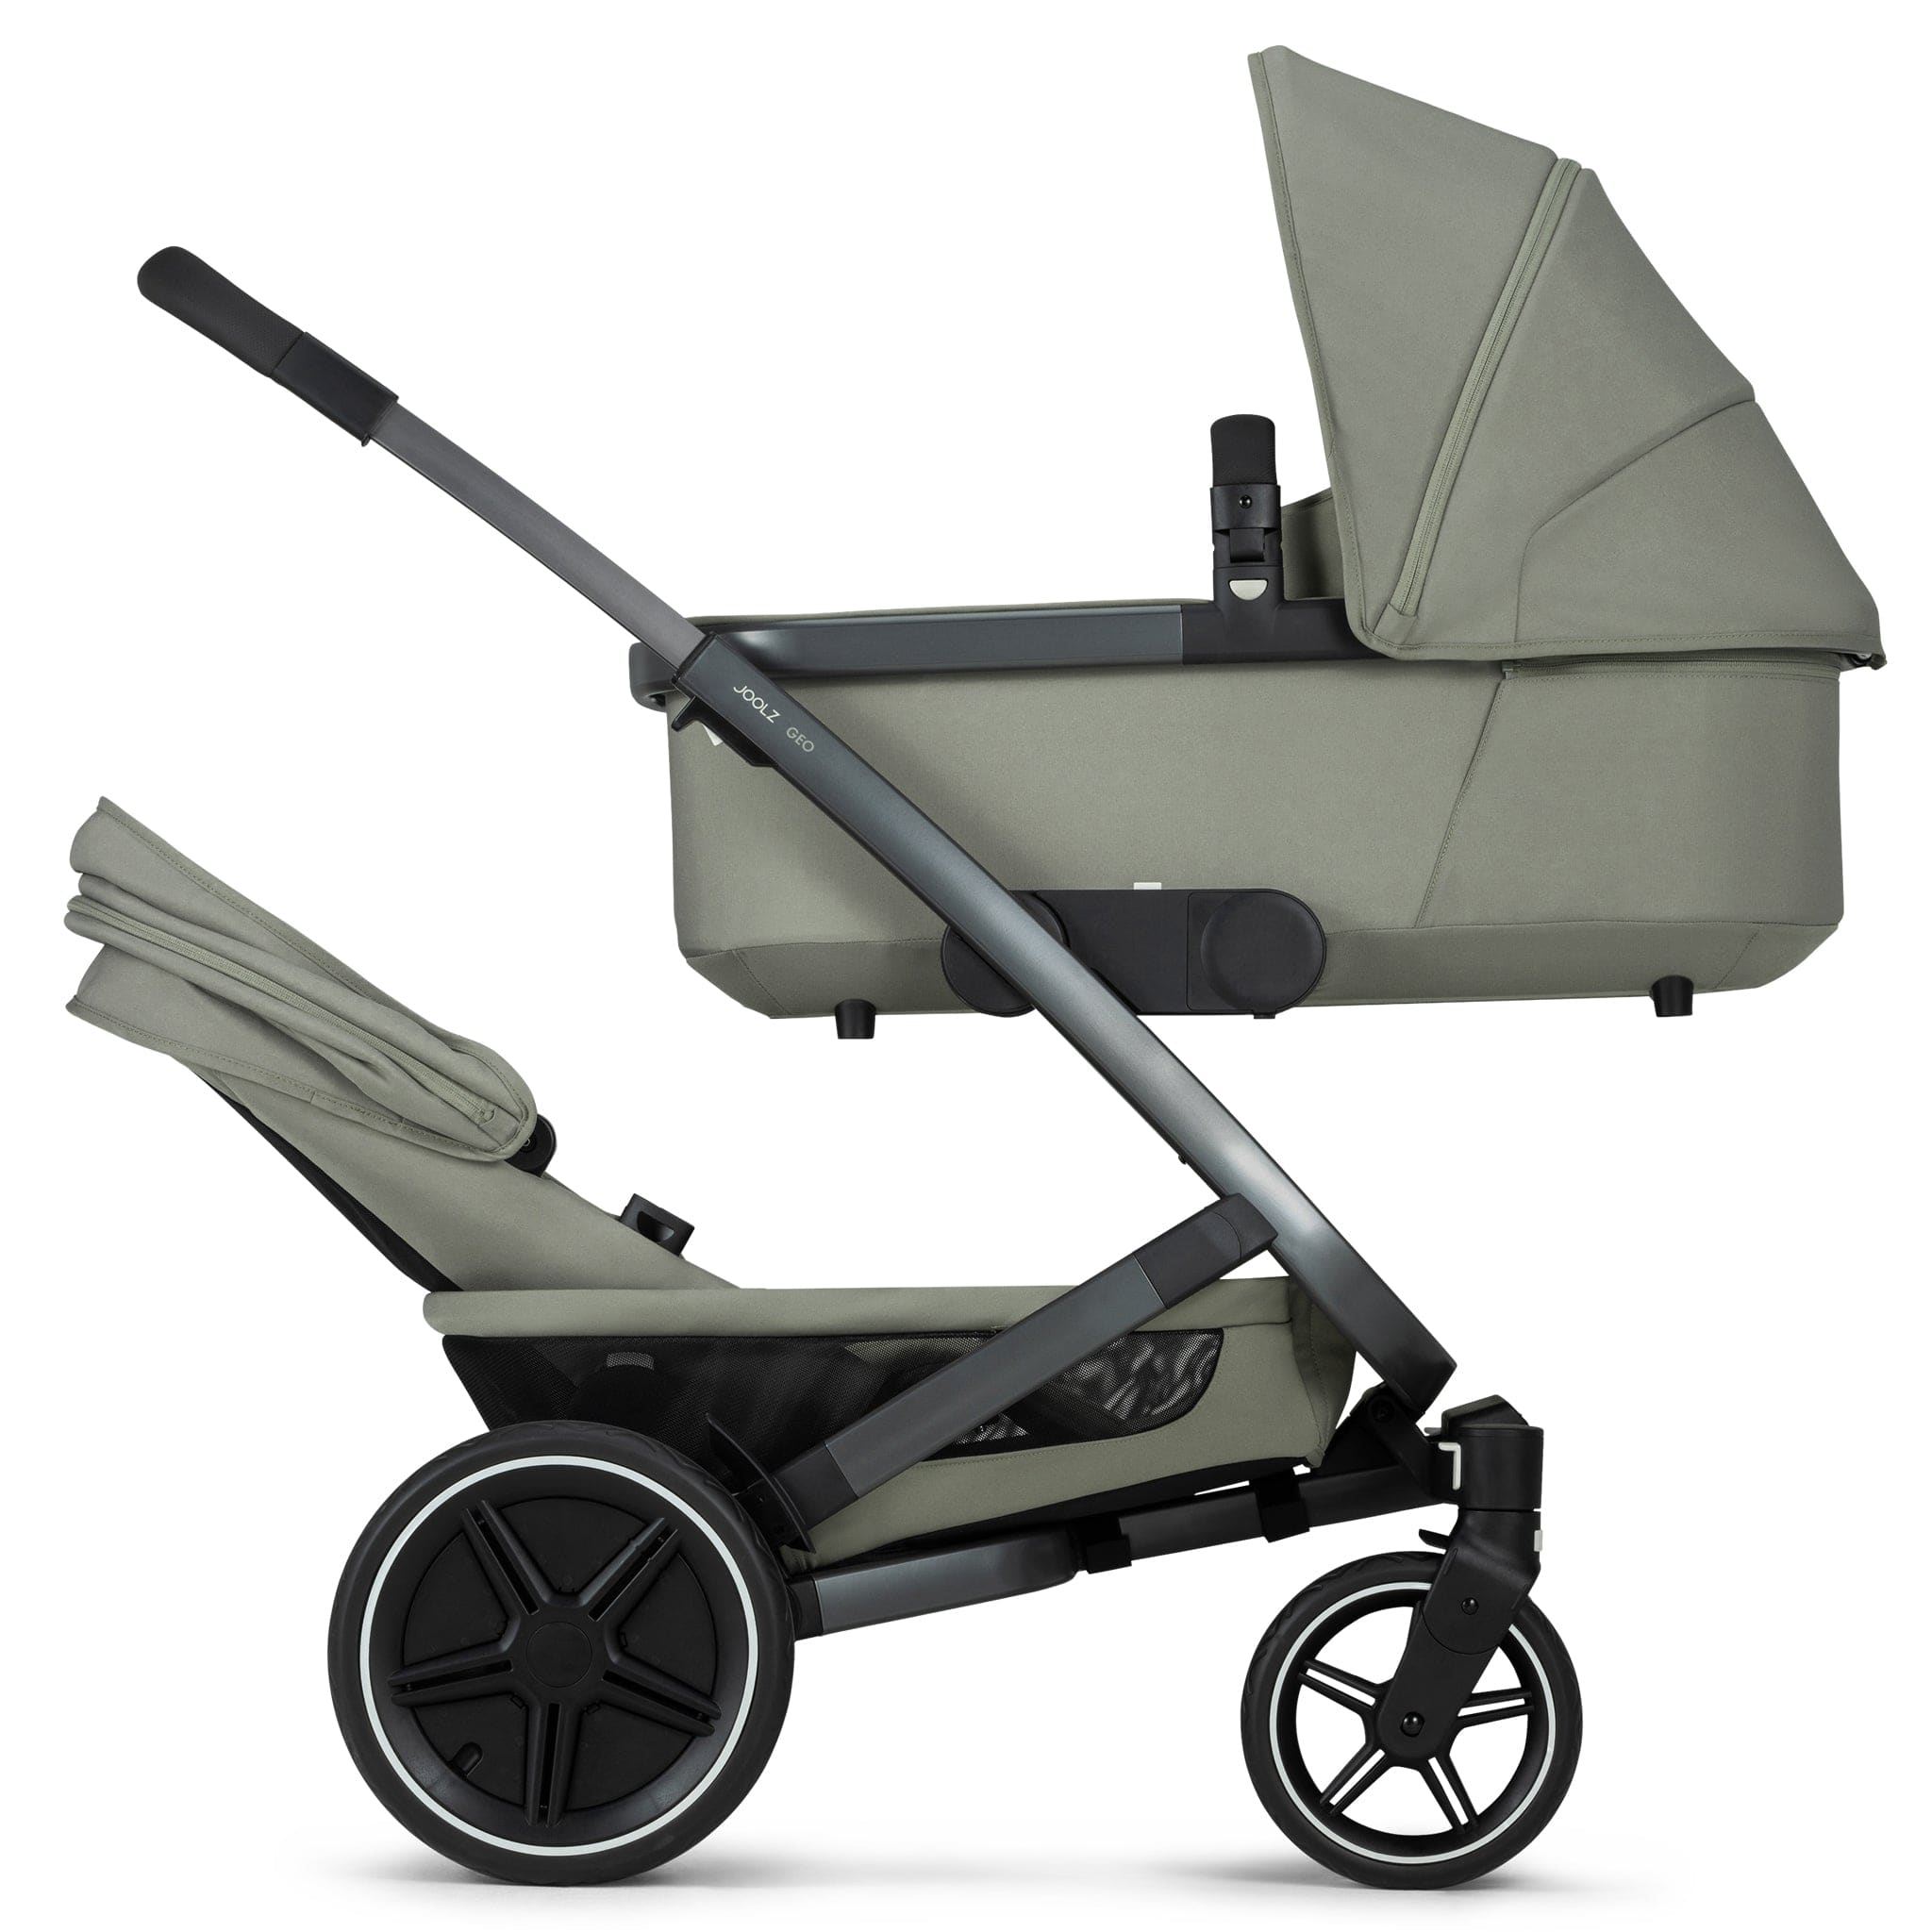 Joolz Geo3 Twin Set in Sage Green Travel Systems 071122 8715688068502